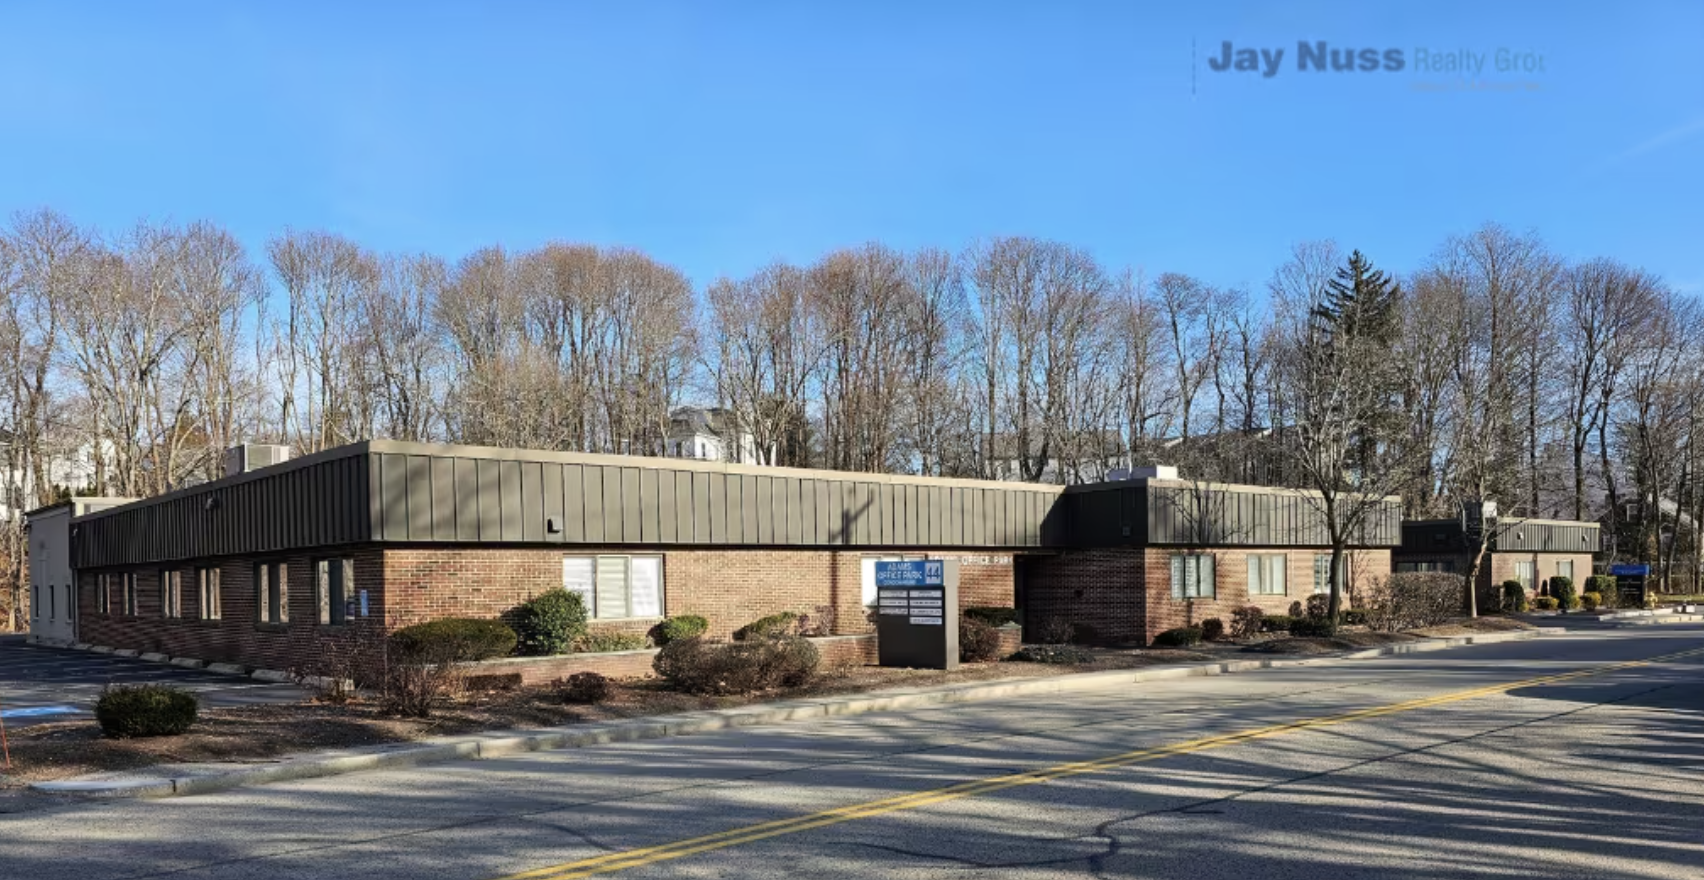 44 Adams St – Adams Office Park1,416 SF Office Condo Unit Offered at $279,000 in Braintree, MA 02184